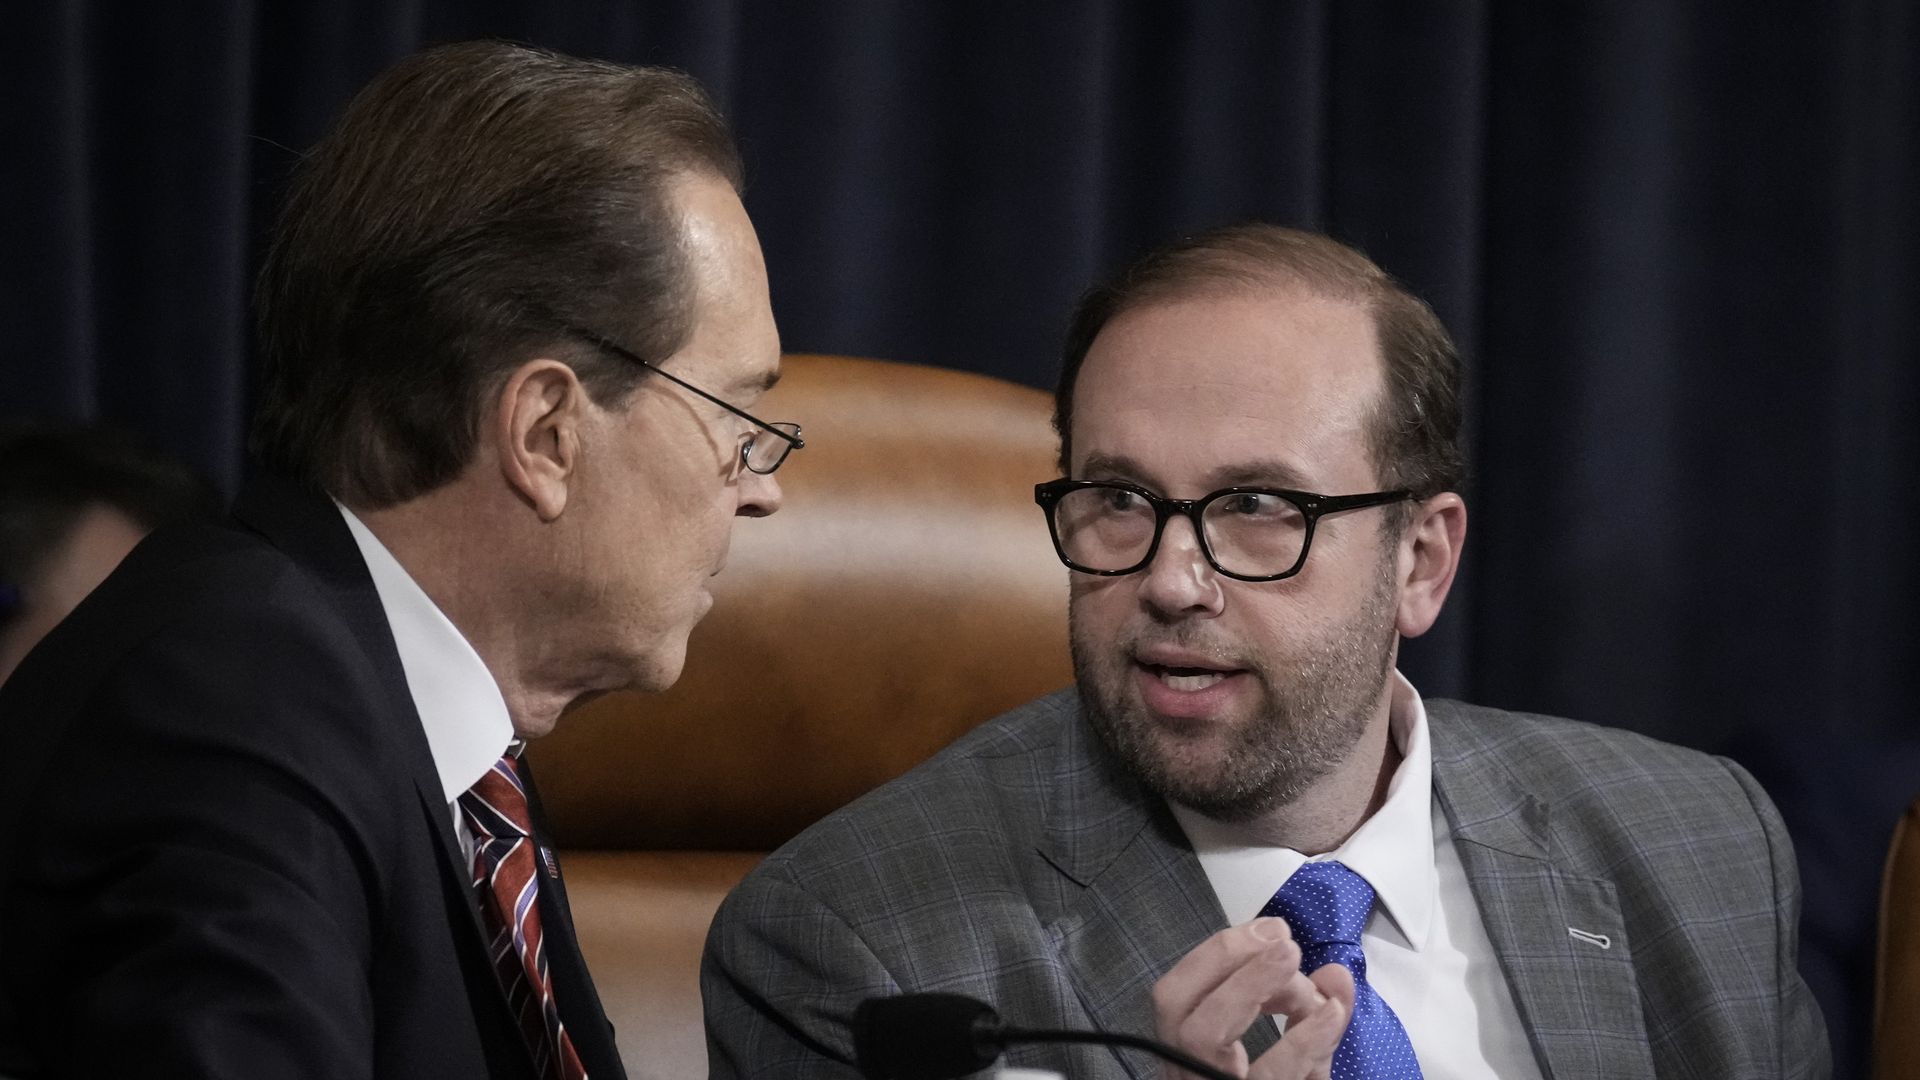 House Ways and Means Committee chairman Jason Smith and Congressman Vern Buchanan talk during a hearing